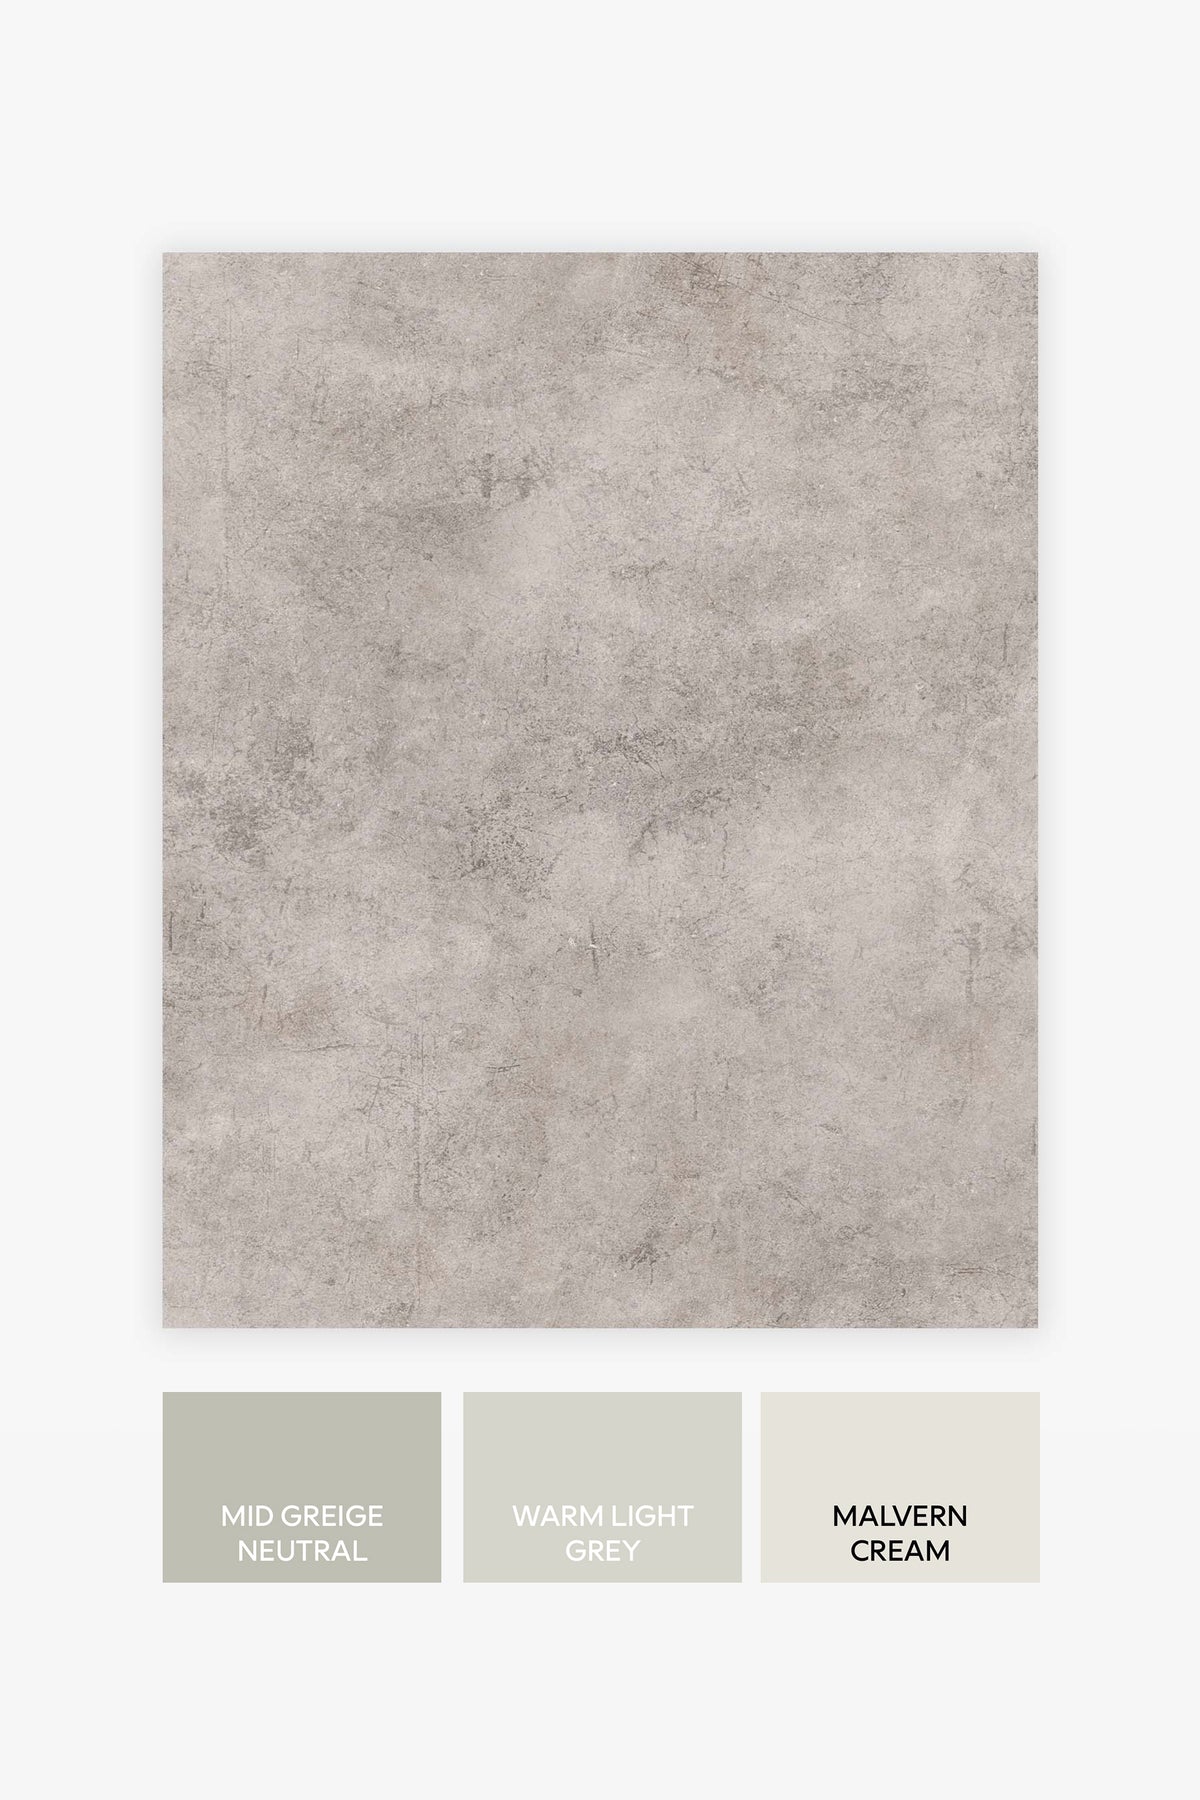 Plaster Abstract Neutral